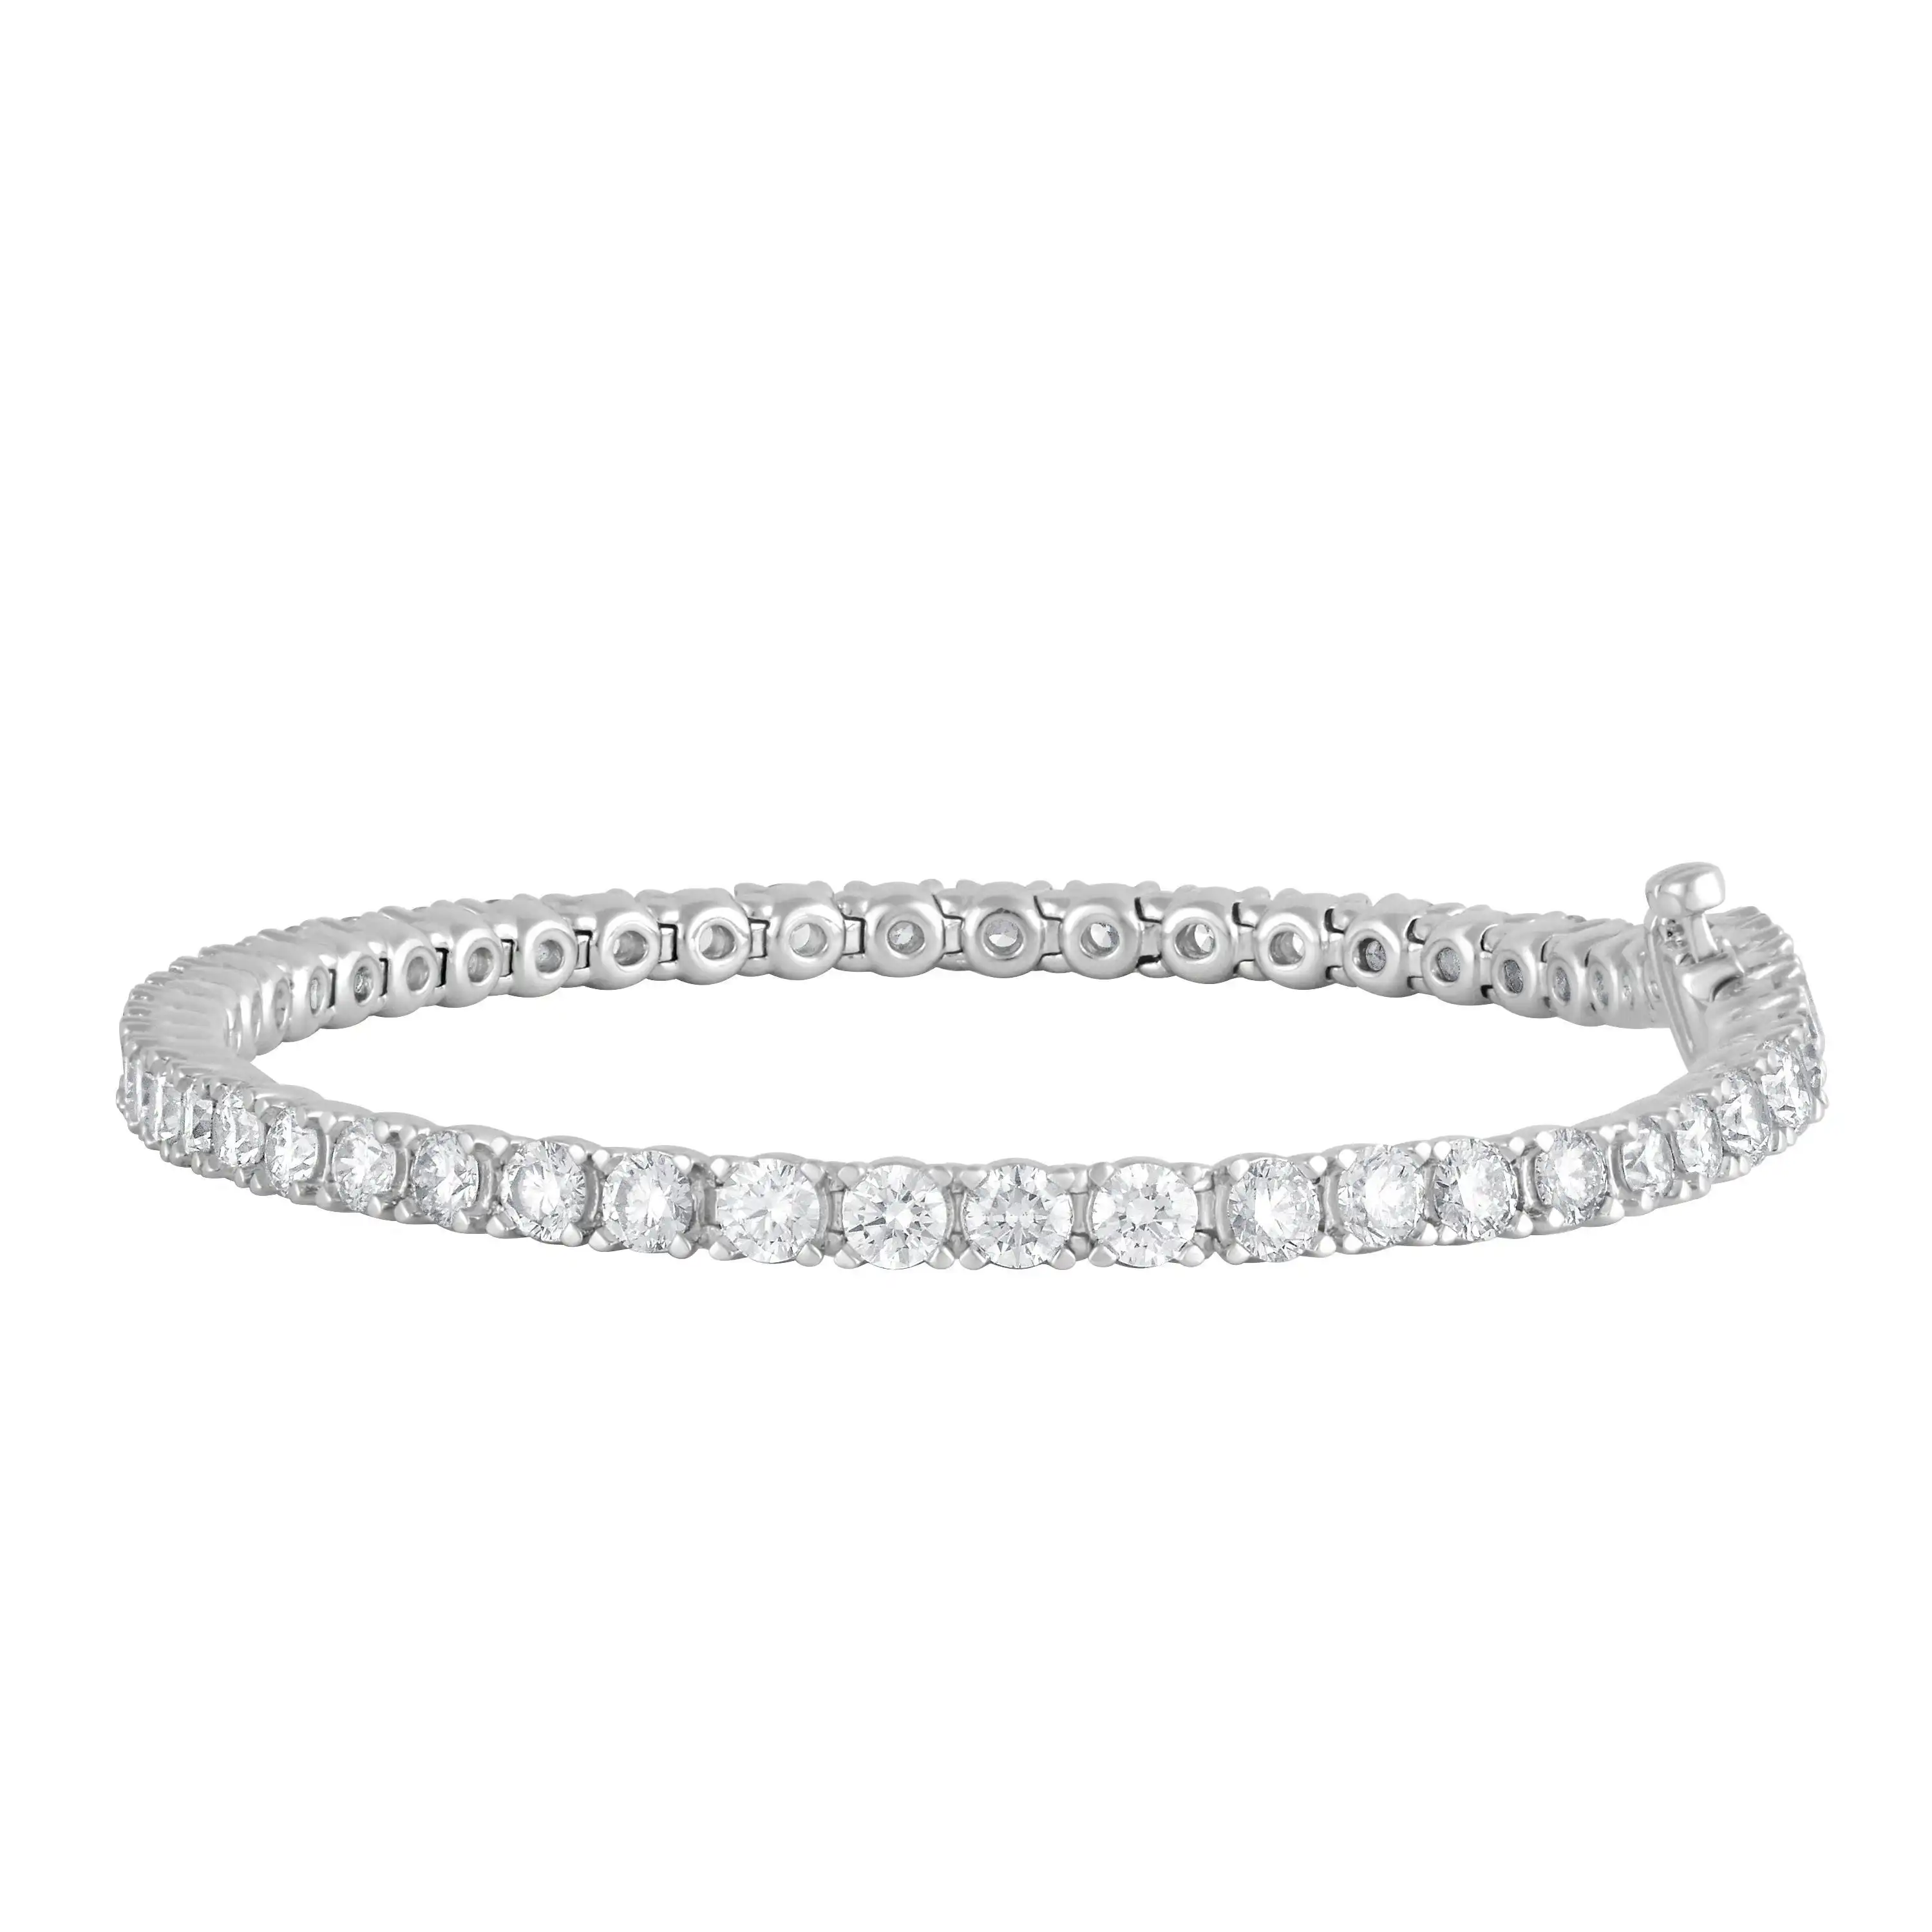 Mirage Tennis Bracelet with 5.00ct of Laboratory Grown Diamonds in Sterling Silver and Platinum